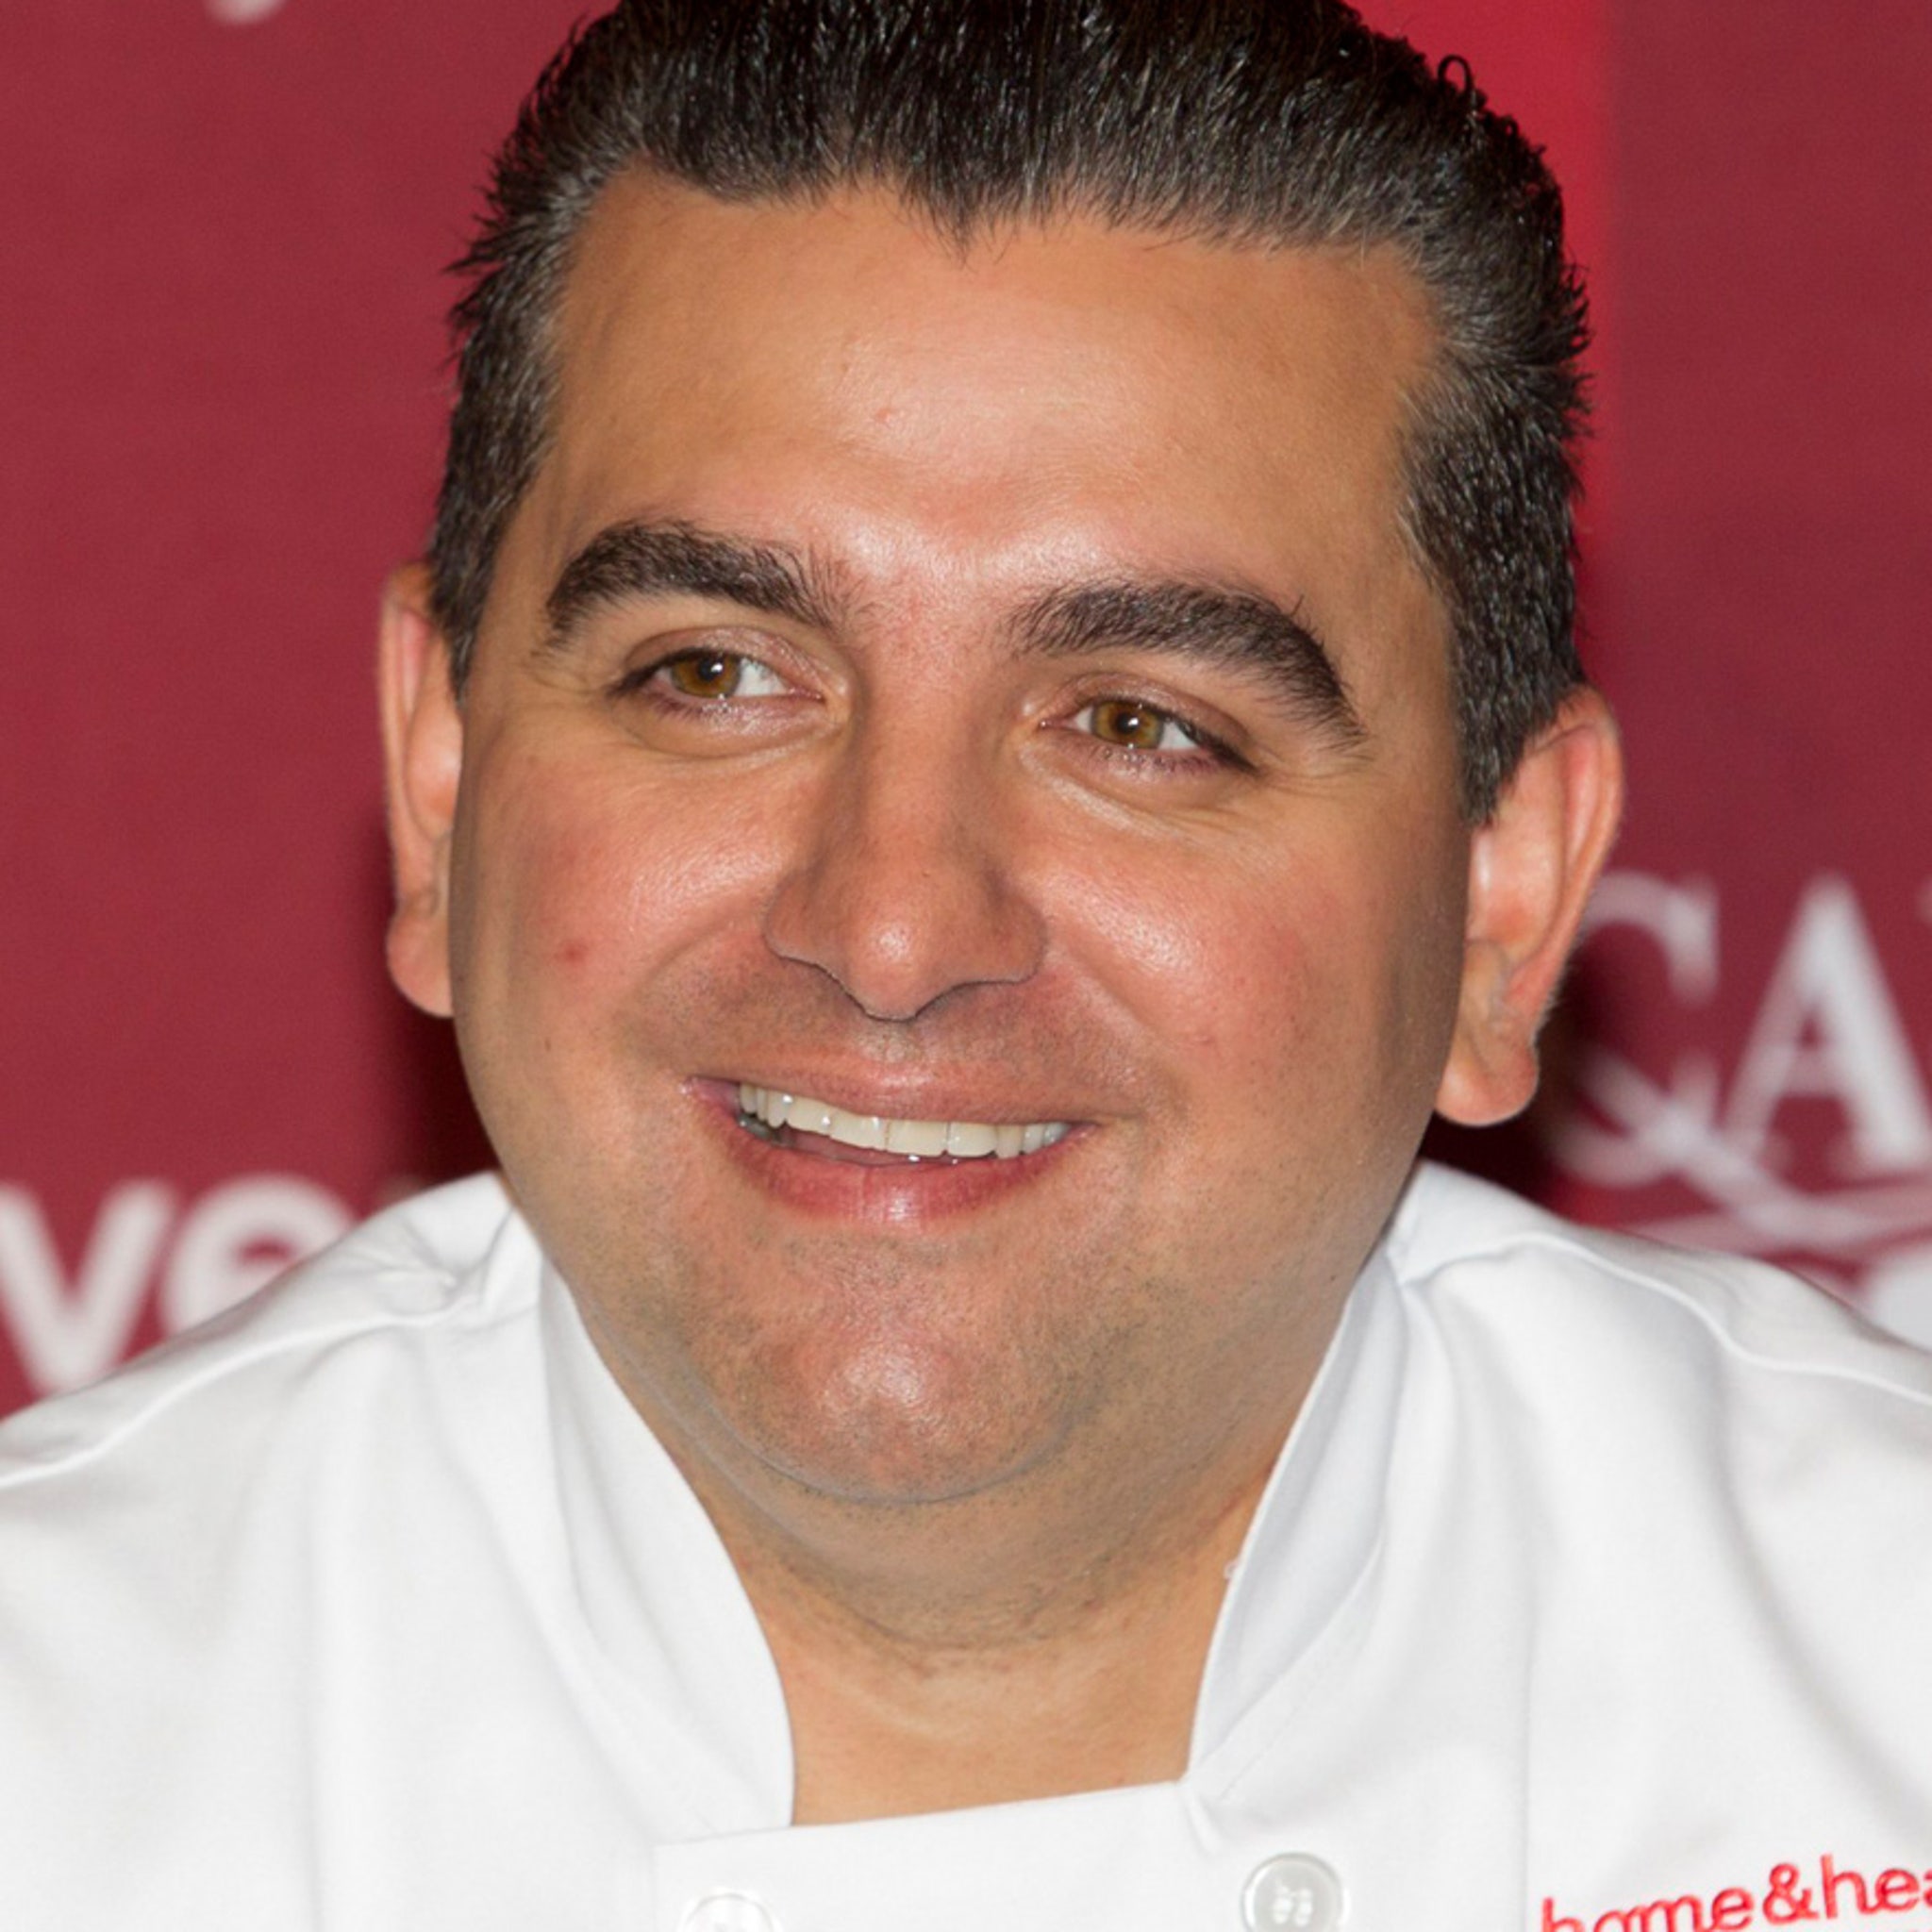 The famous 'Cake Boss' to open his first Canadian location in the GTA -  Curiocity